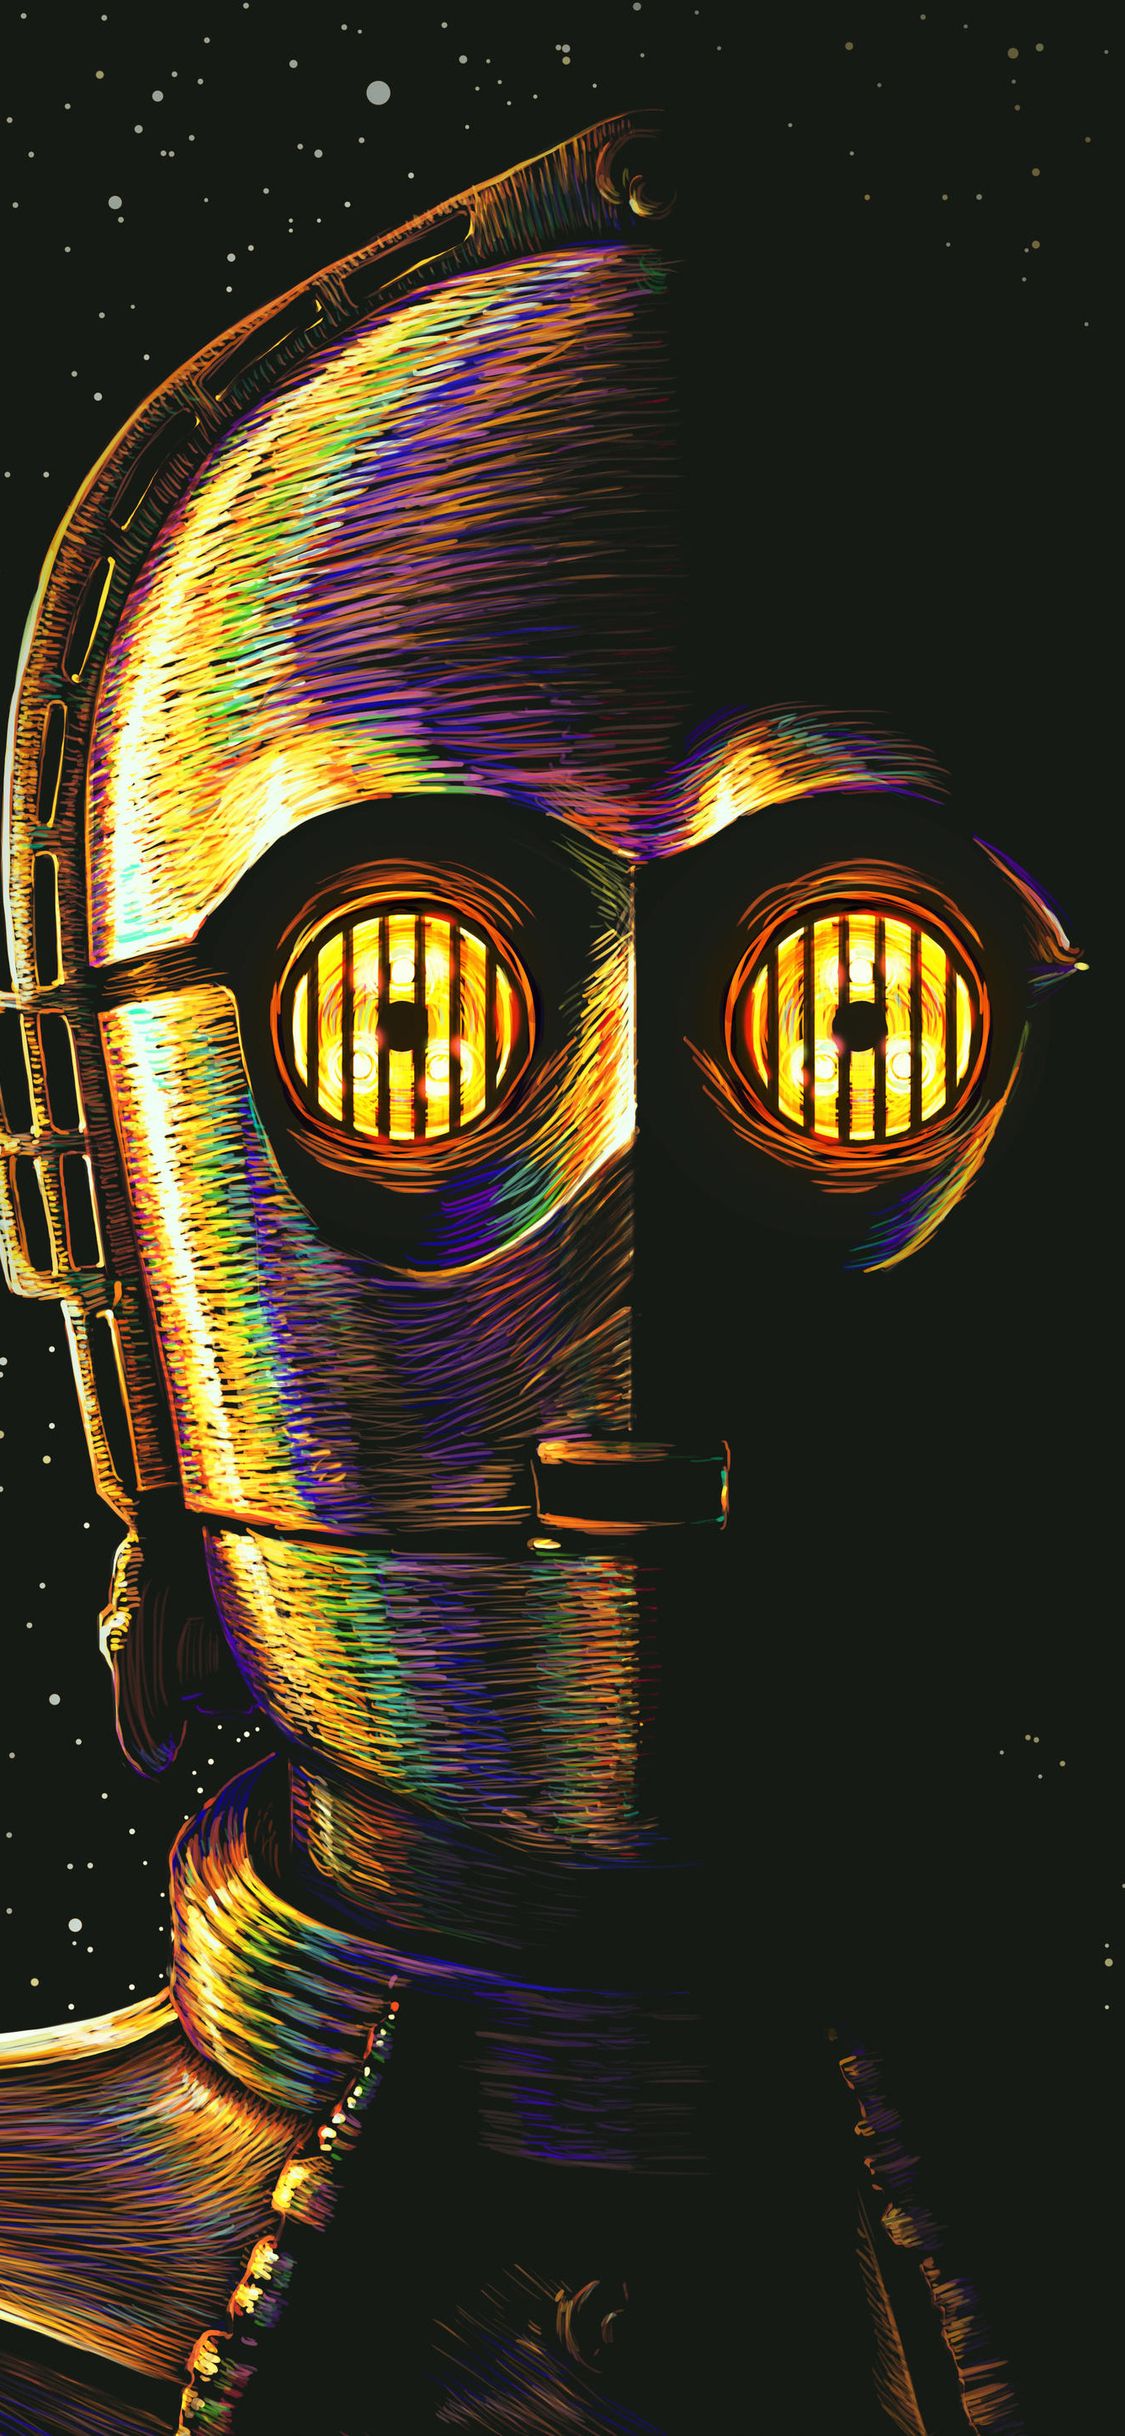 C 3PO Art iPhone XS, iPhone iPhone X HD 4k Wallpaper, Image, Background, Photo and Picture